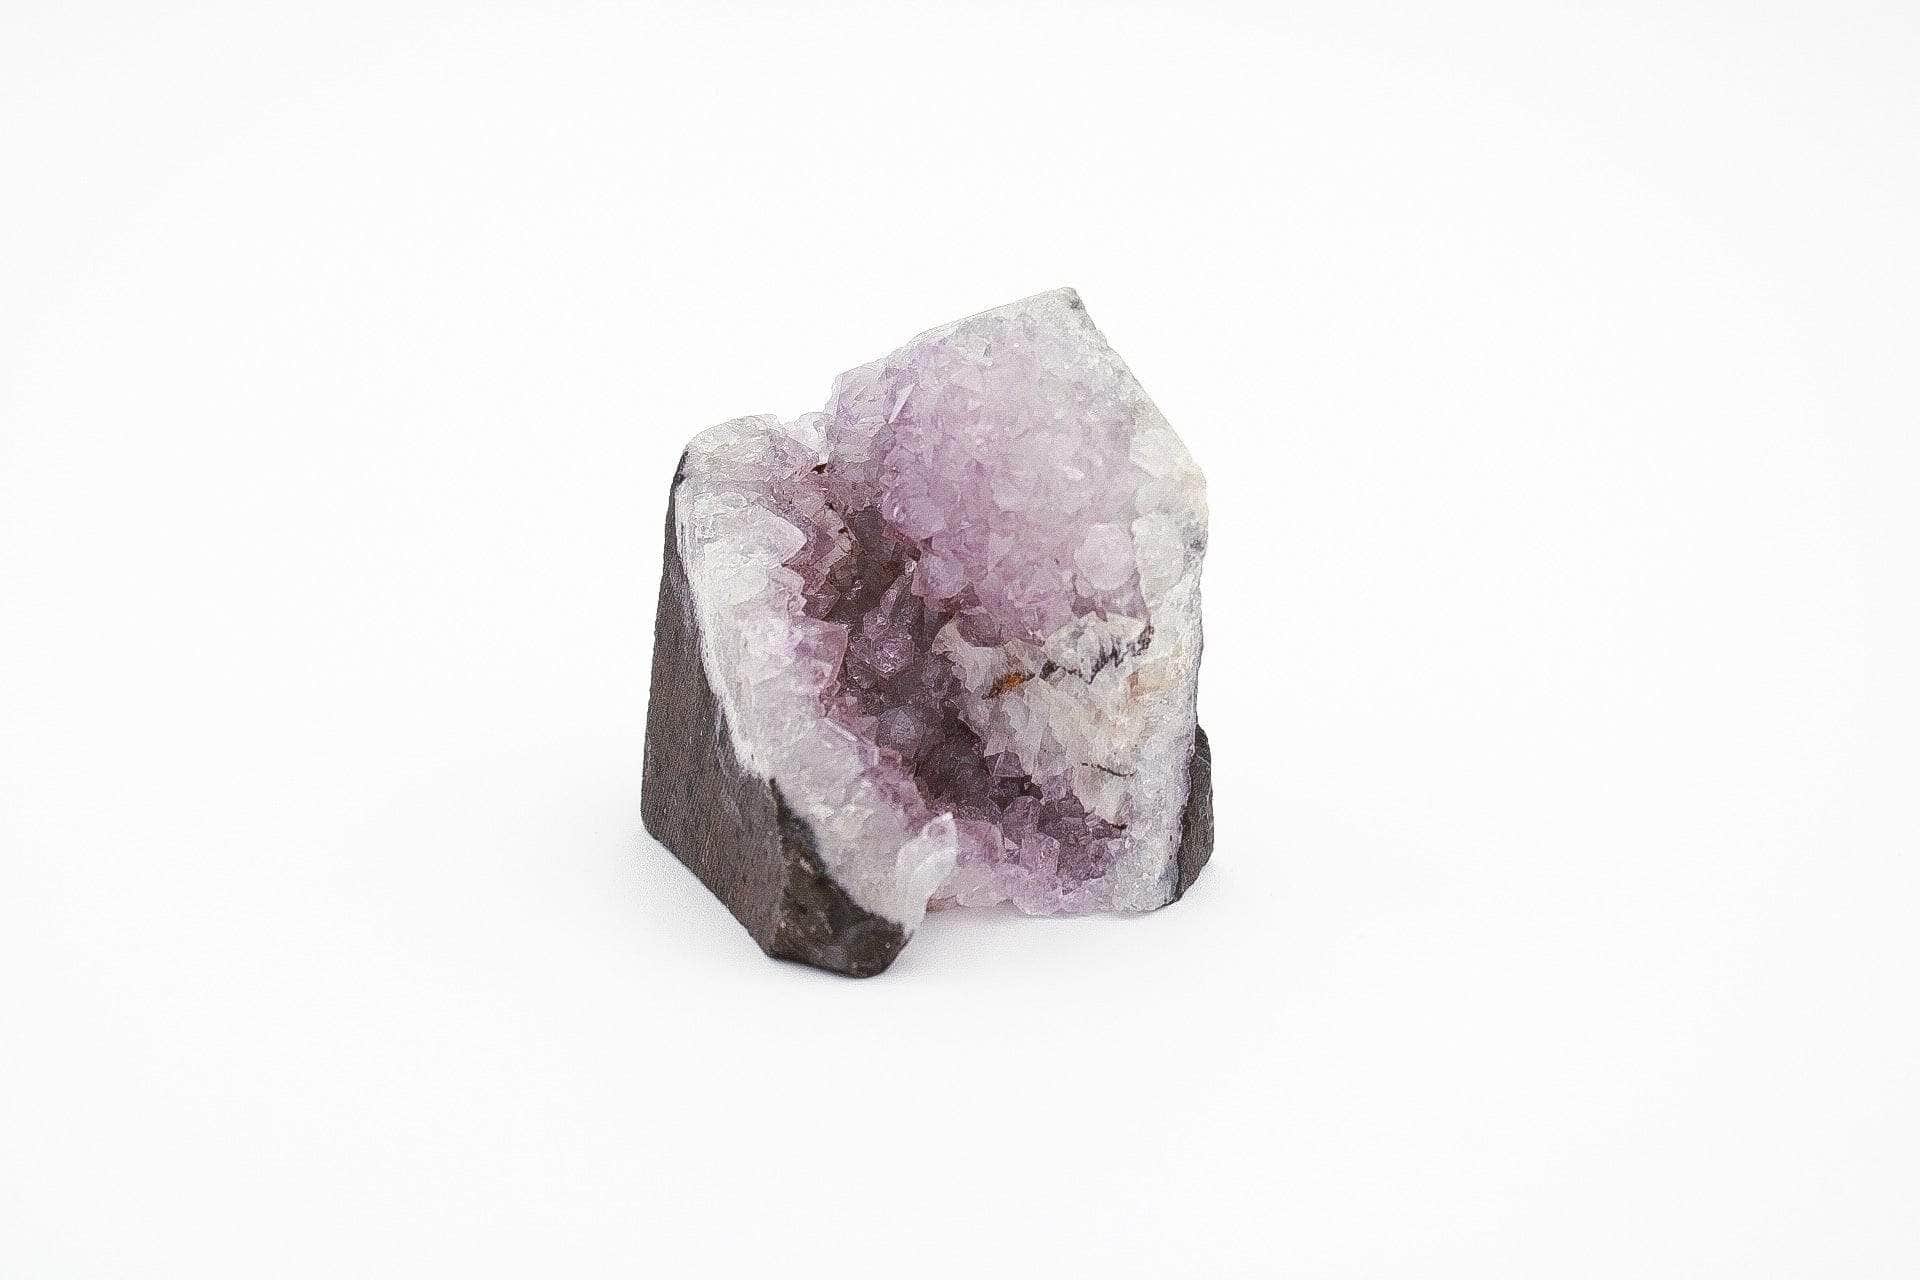 6-11 Crystals Crystal Amethyst with Calcite Inclusion 2.25" x 2.5" x 2.75"